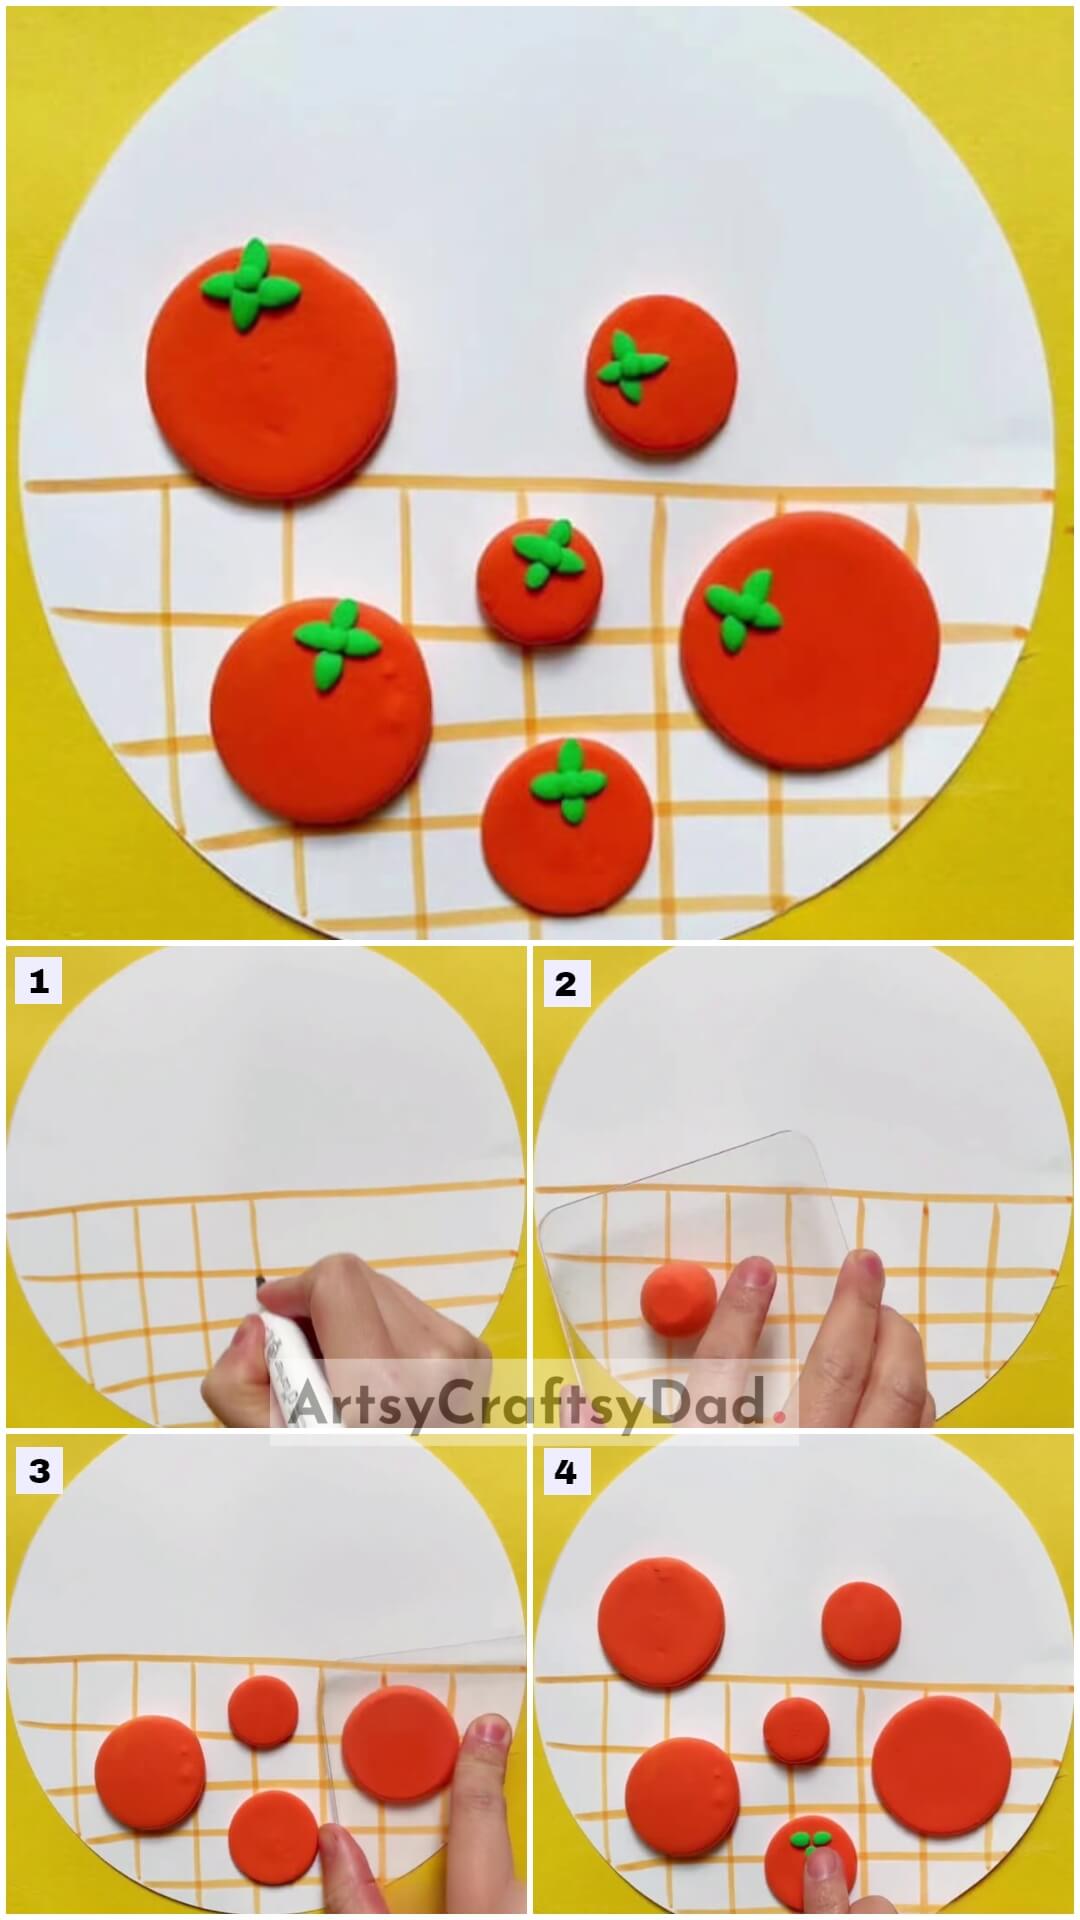 Clay Tomato Step By Step Craft Tutorial For Kids